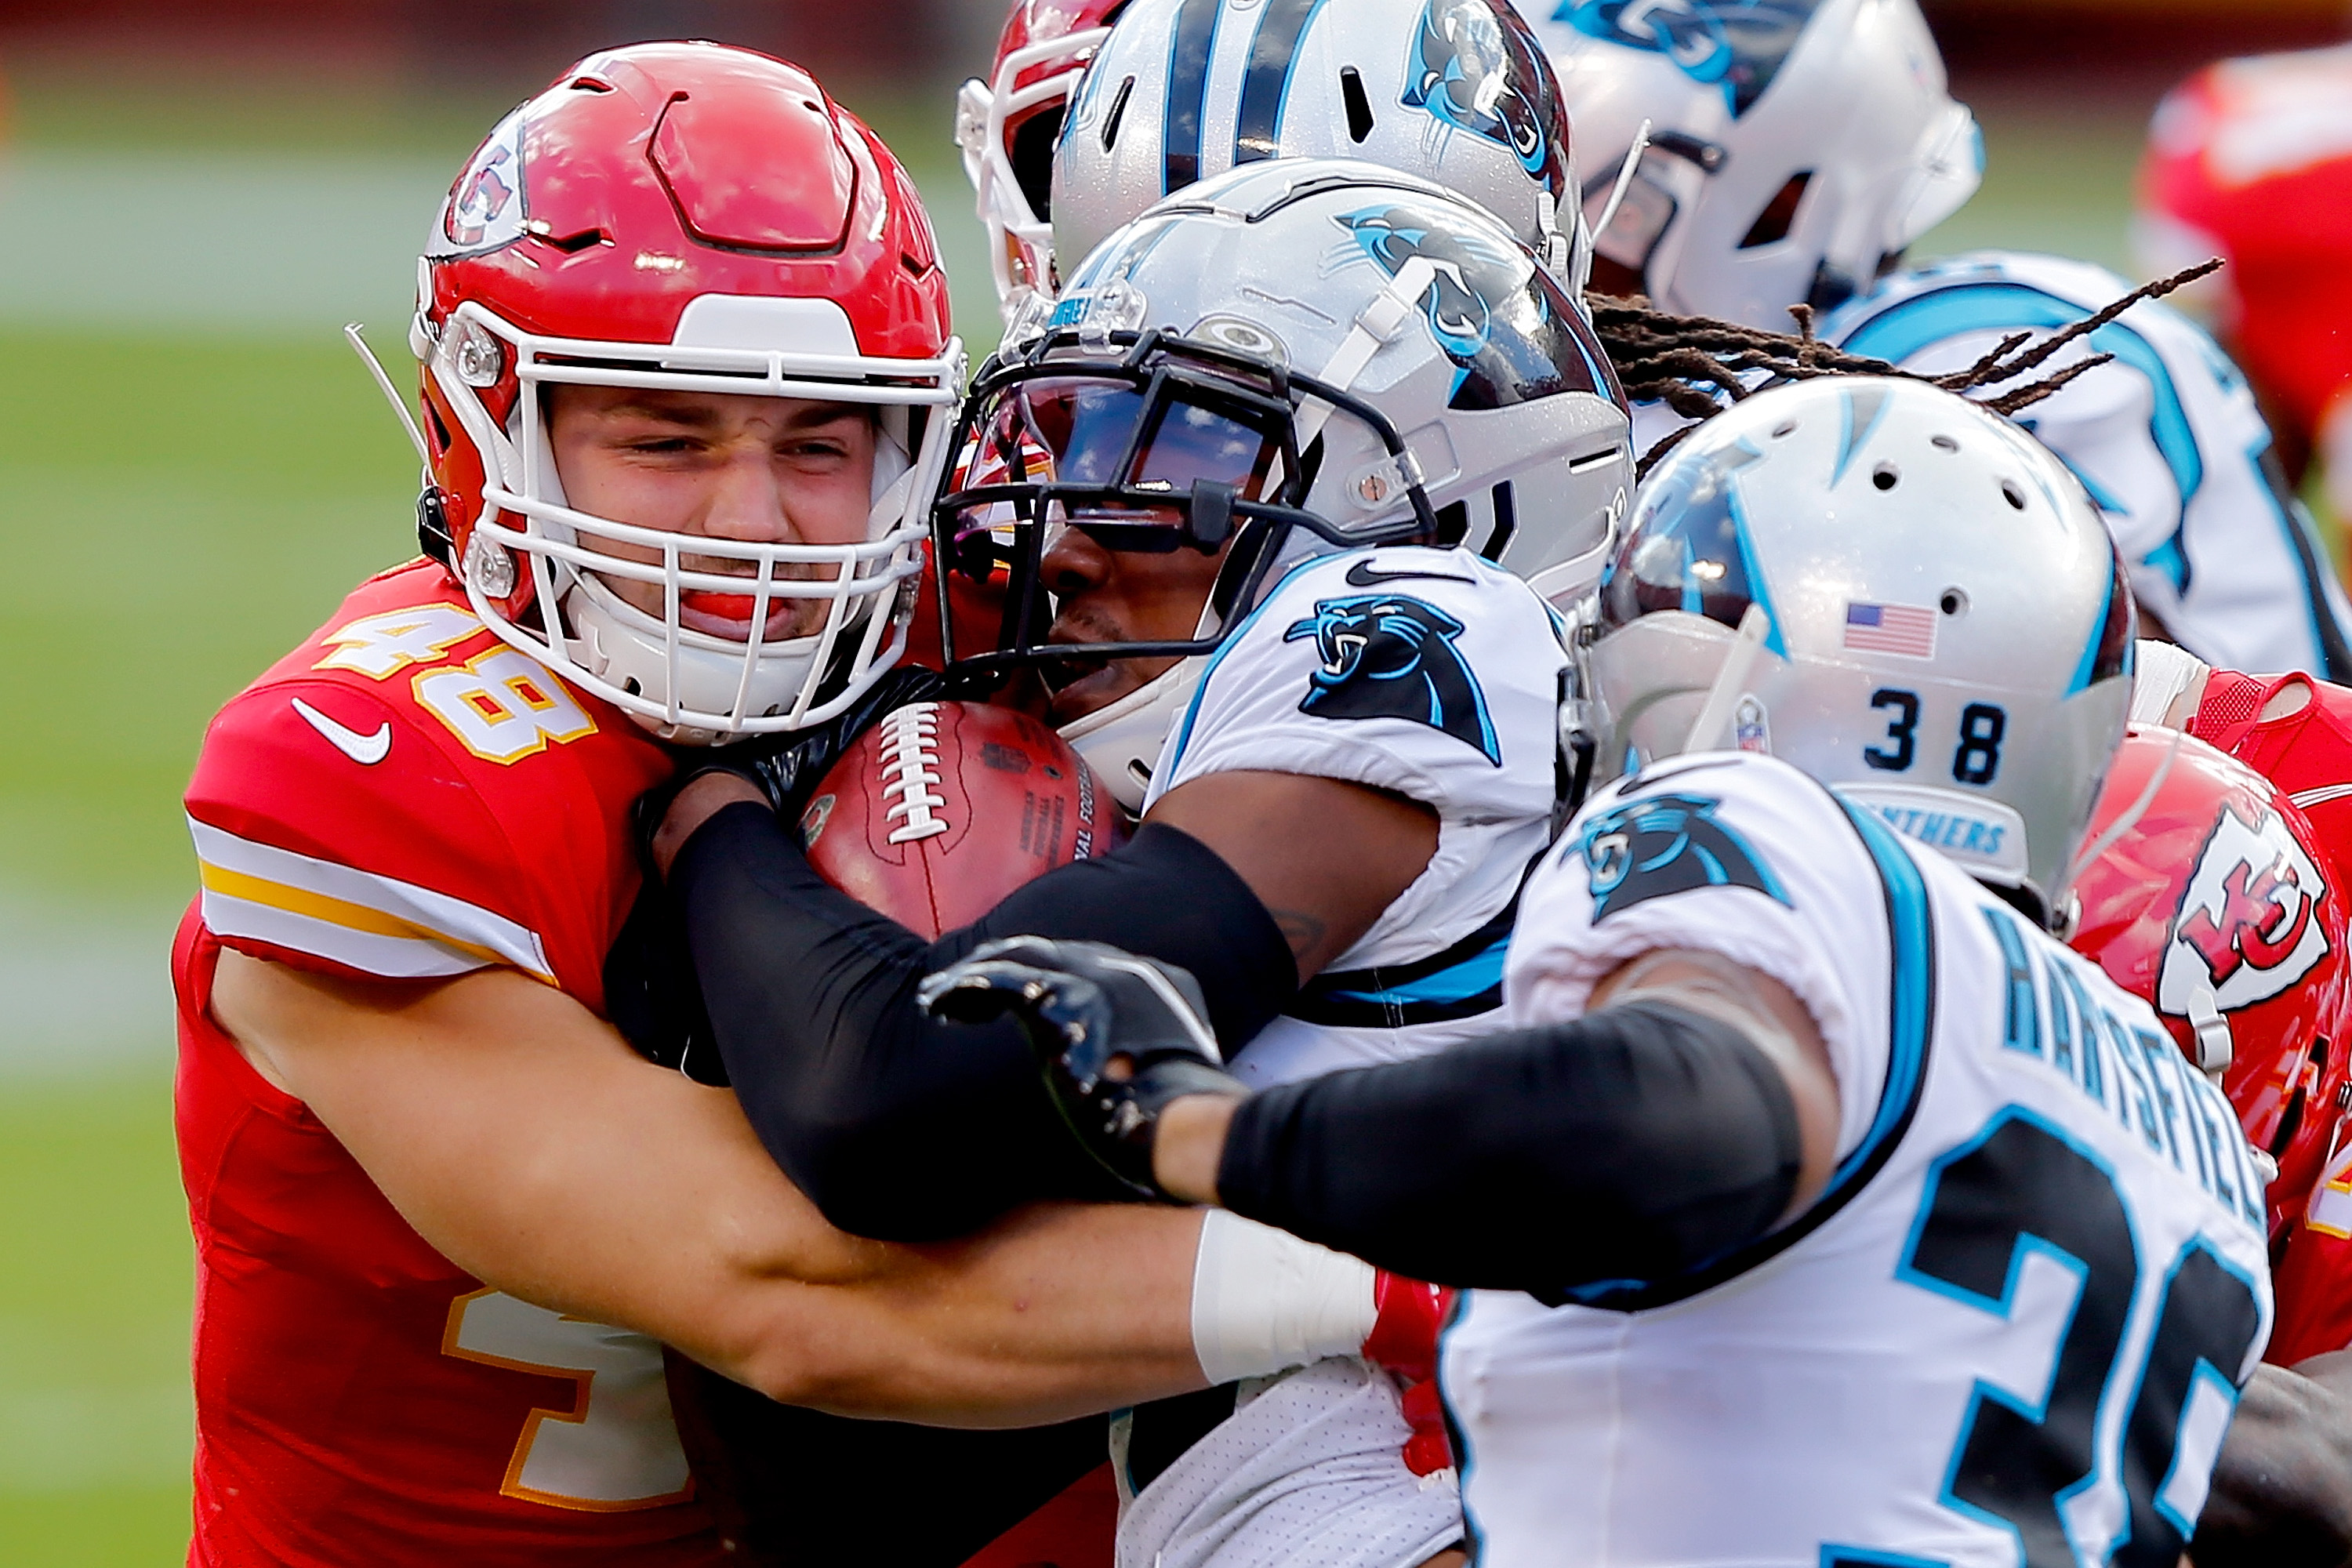 Nick Keizer of the Kansas City Chiefs tackles Pharoh Cooper of the Carolina Panthers